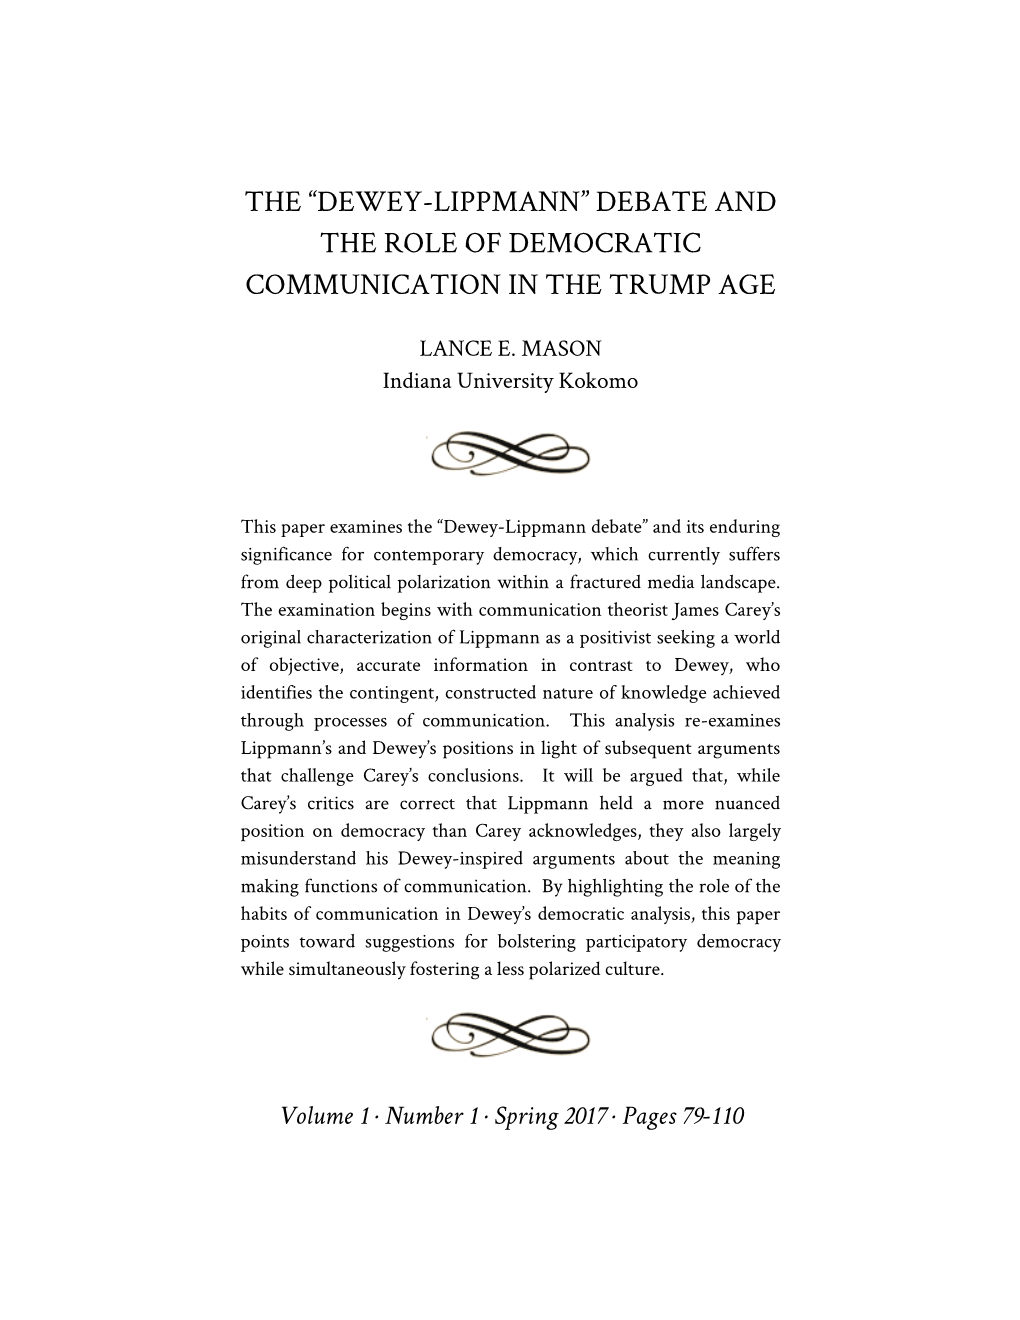 Dewey-Lippmann” Debate and the Role of Democratic Communication in the Trump Age